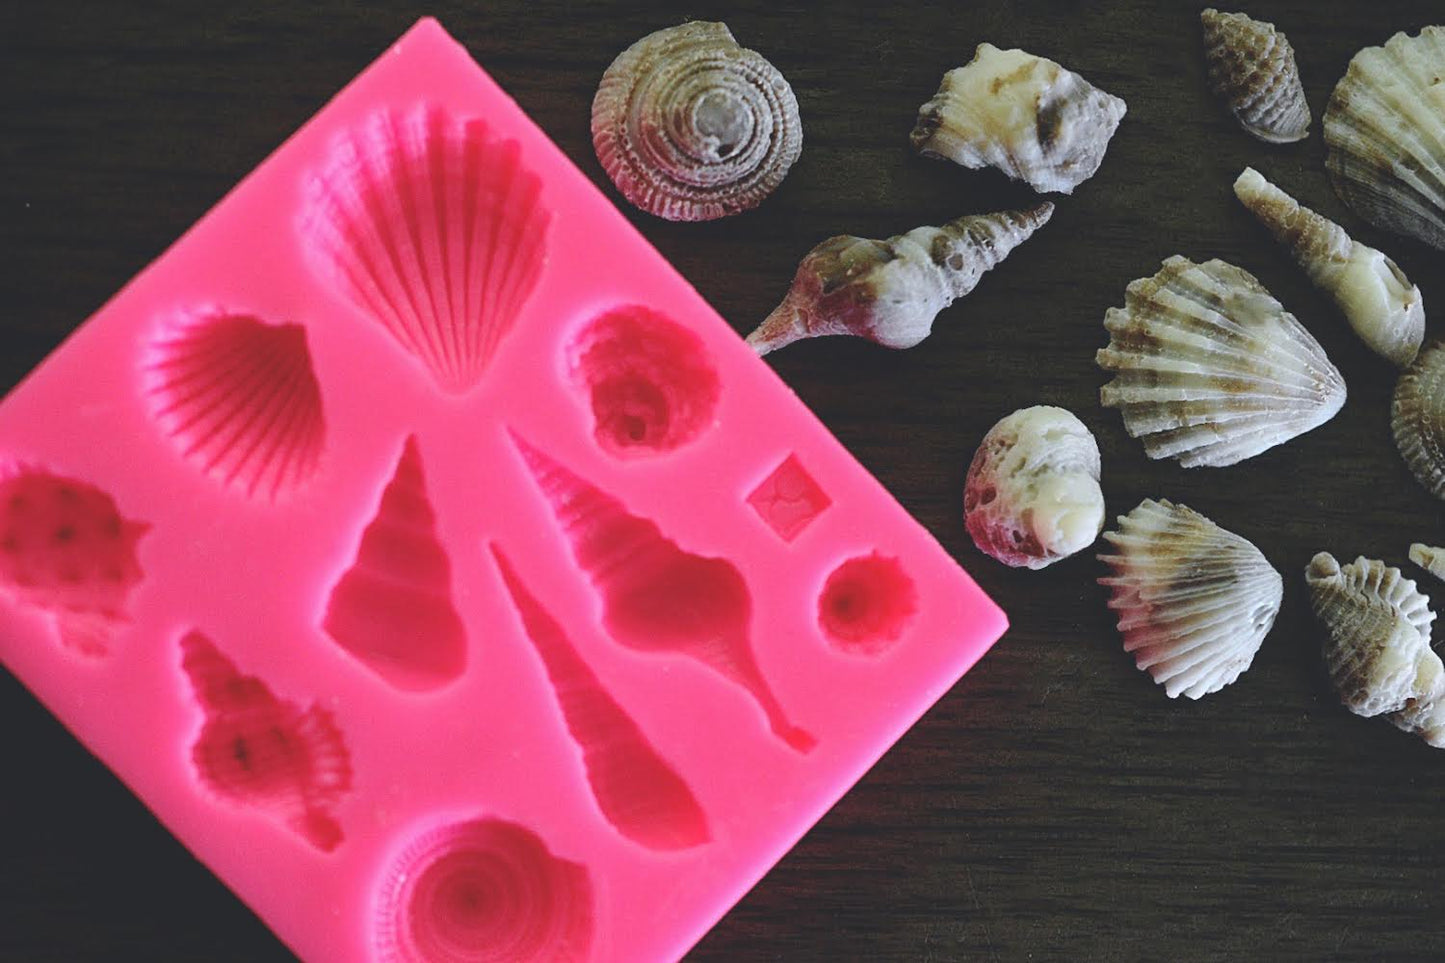 A close up view of an assortment of seashells made from soap rests next to a square soap mold on a wooden surface. The seashells are colored a cream and brown color. The mold is pink.